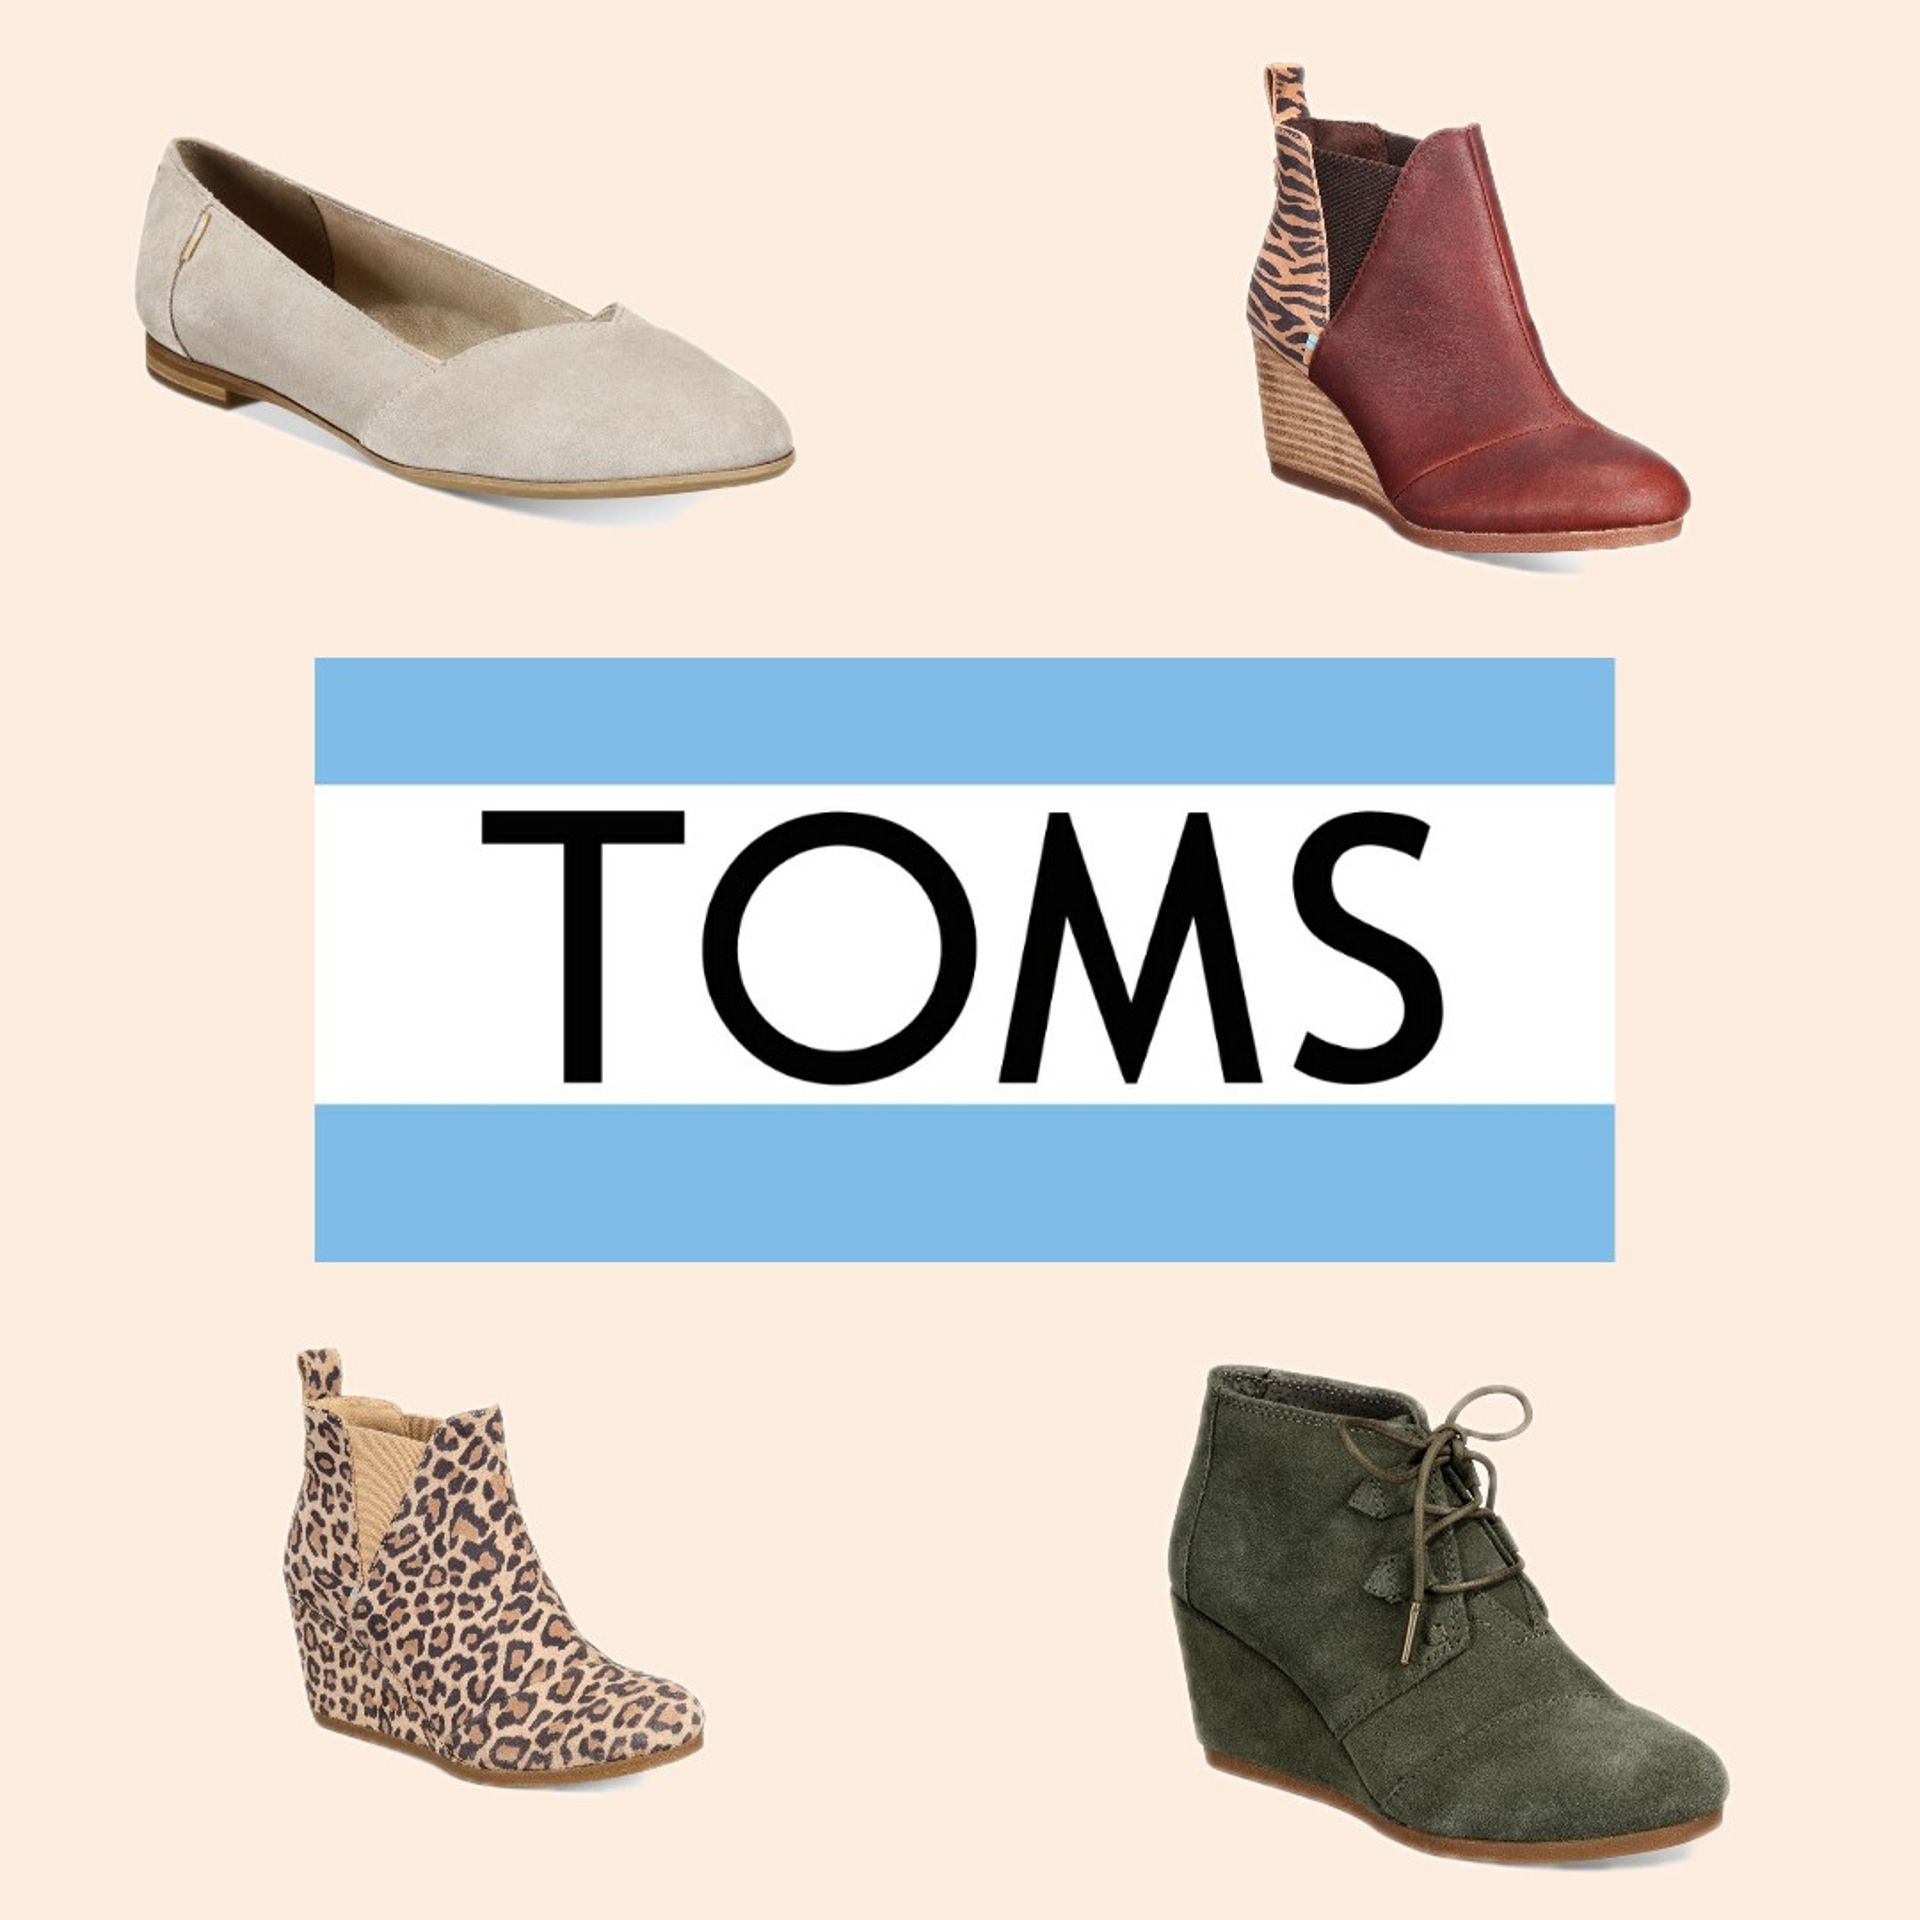 toms shoes near me now